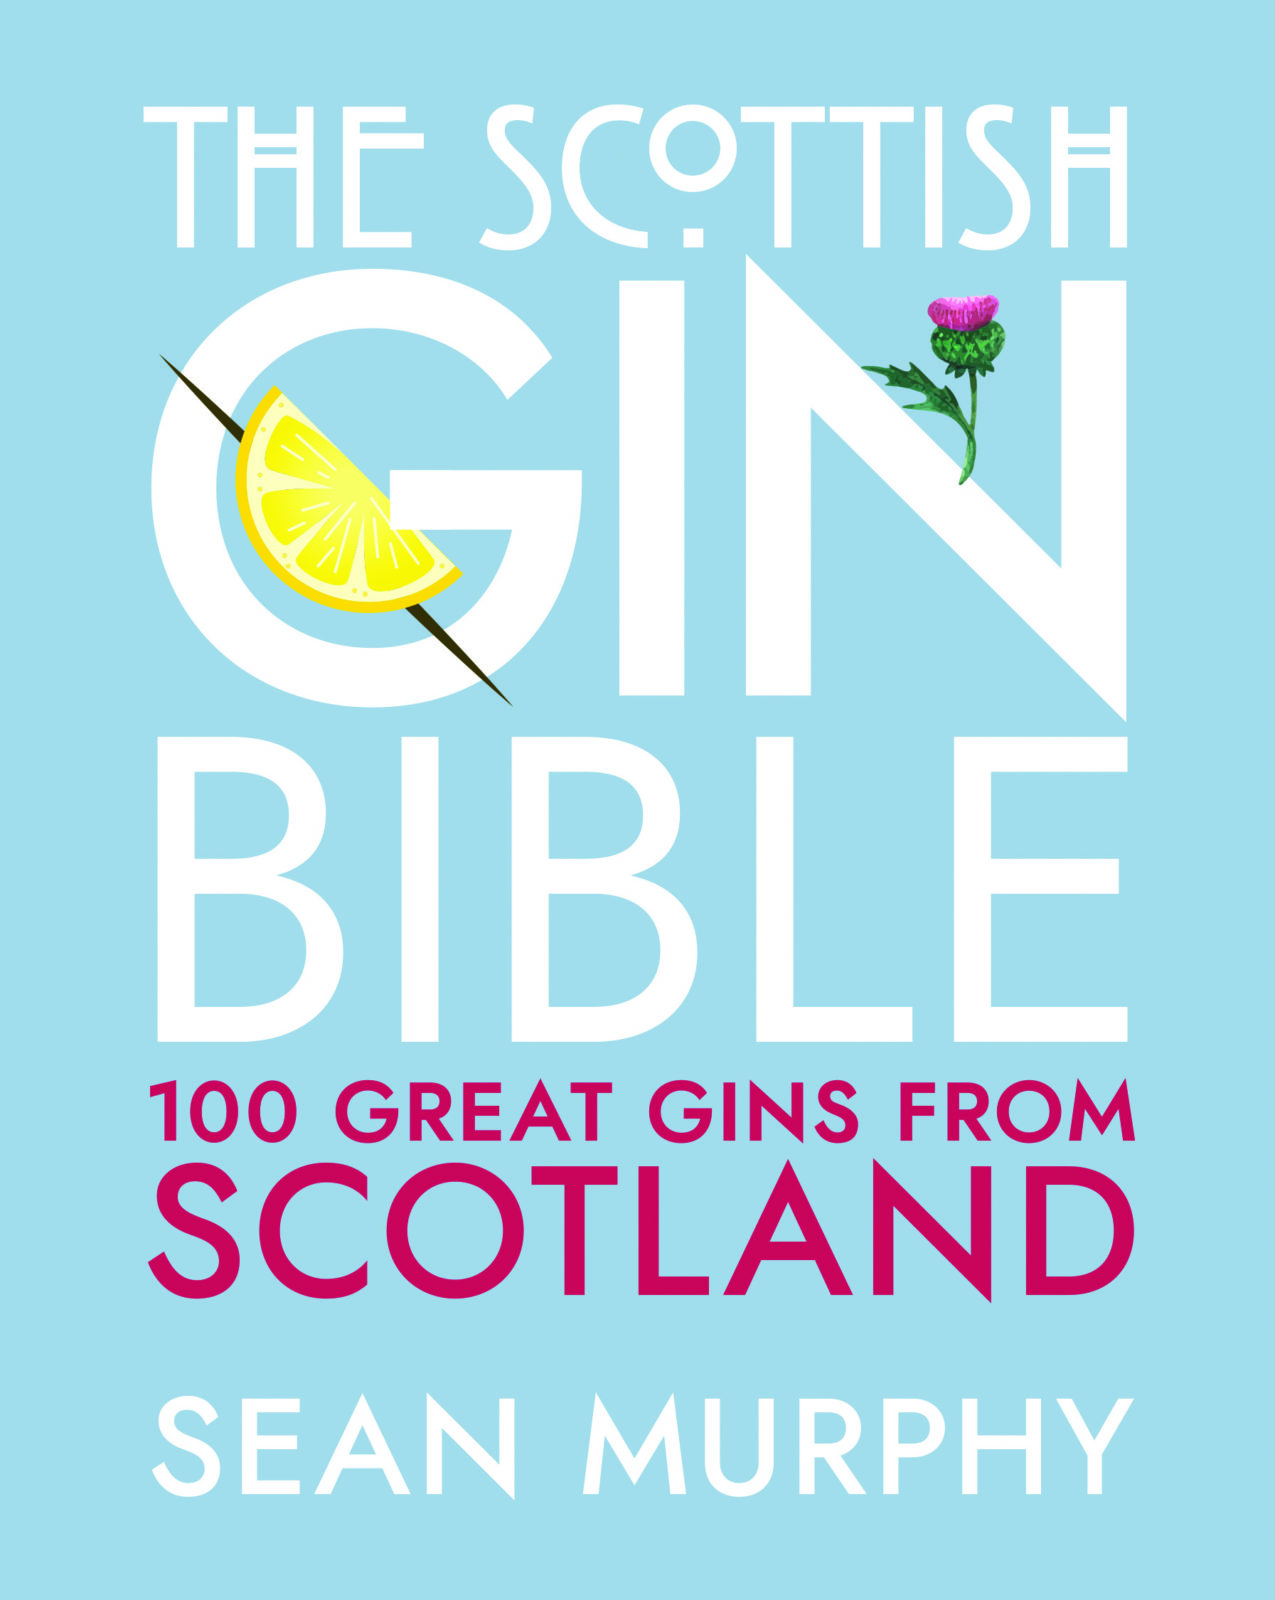 Drinks expert Sean Murphy releases new gin book - The Scottish Gin ...